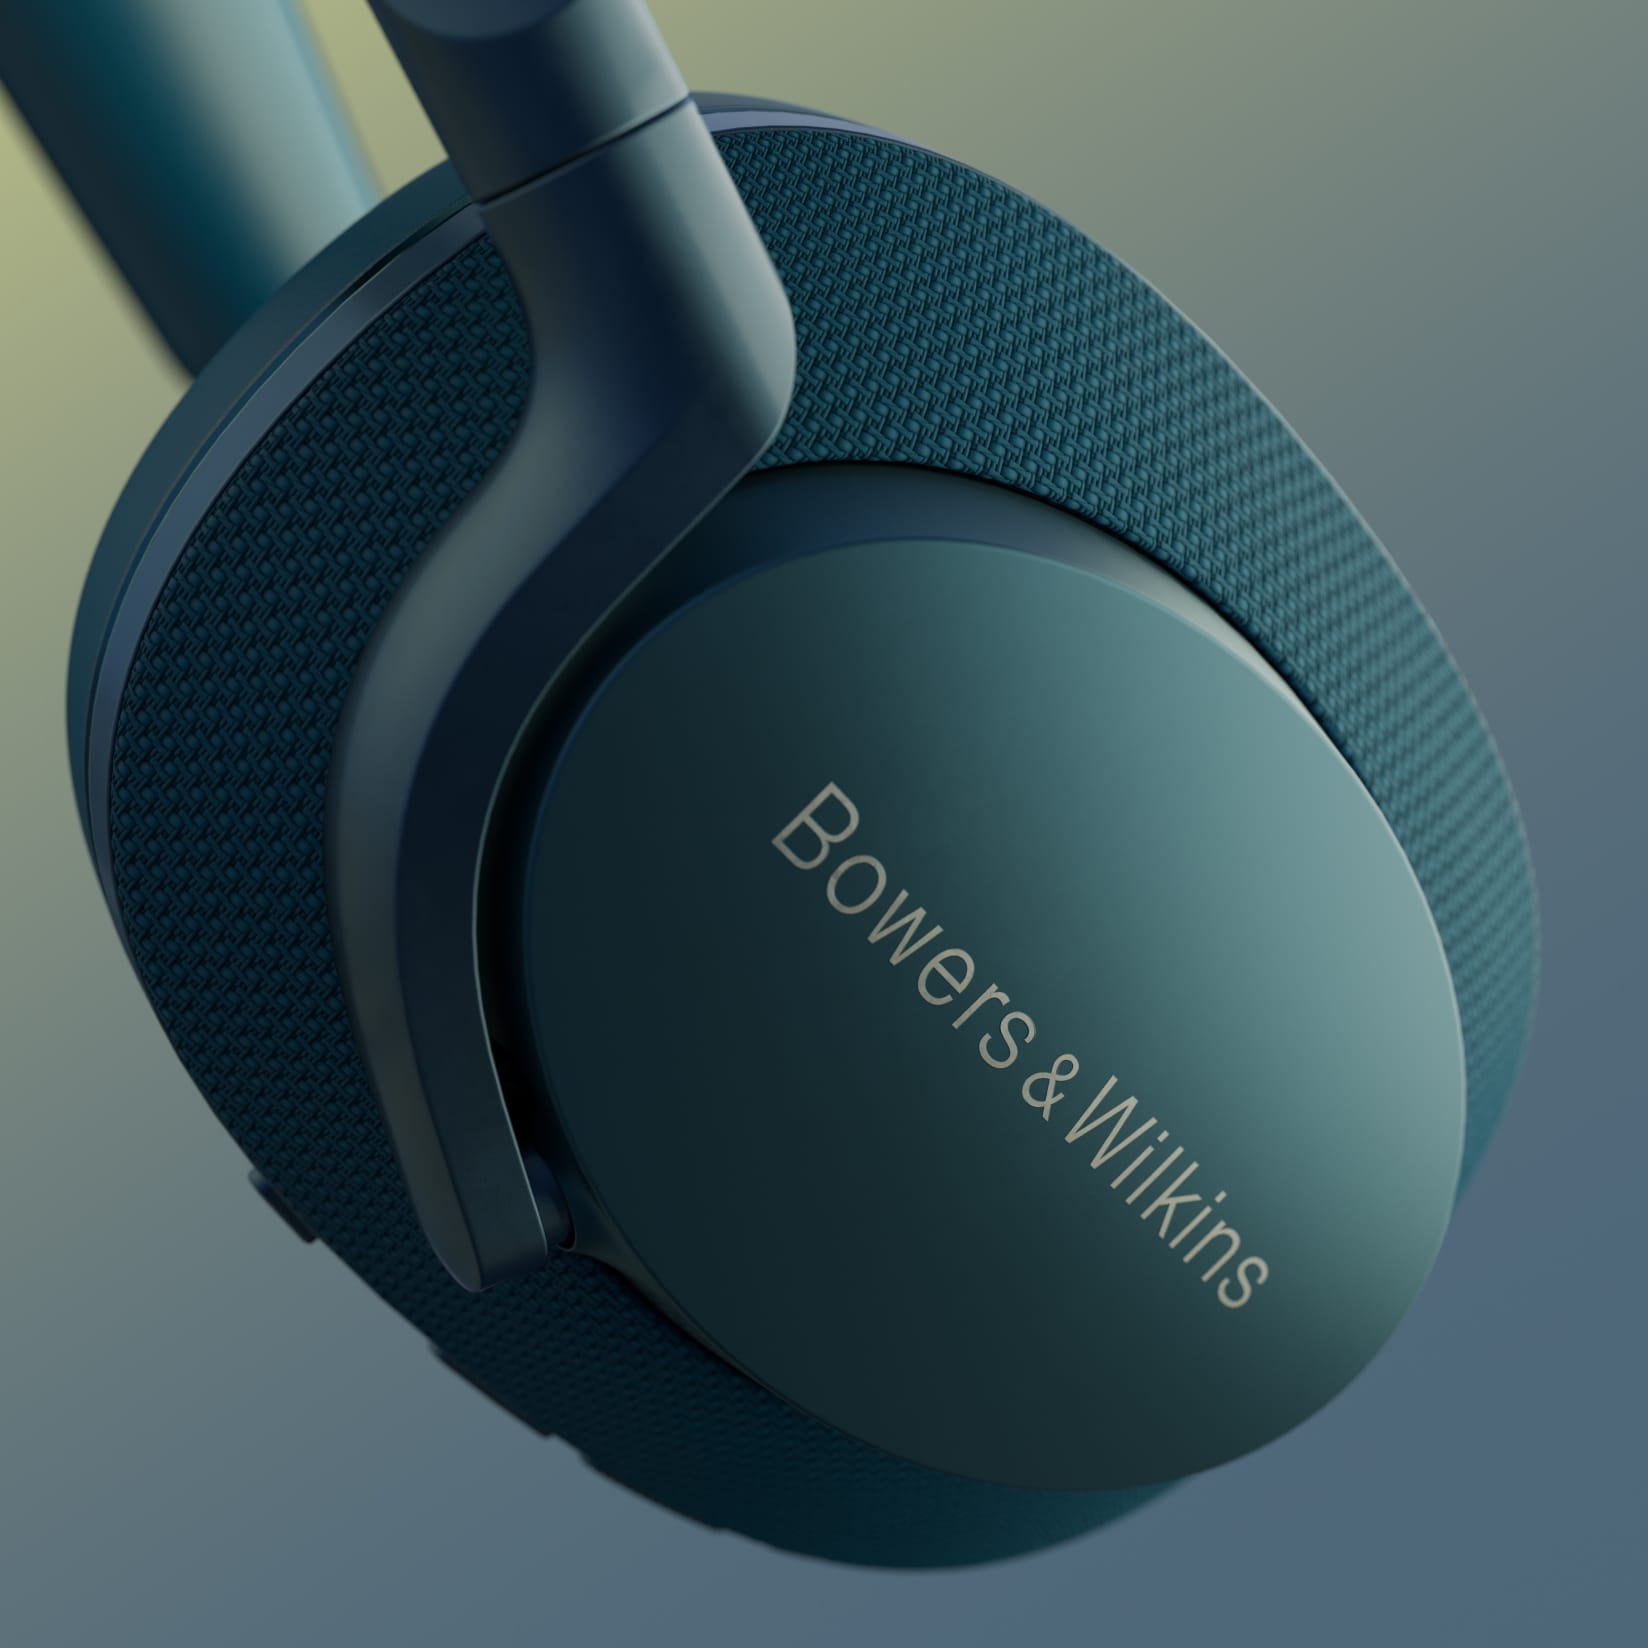 Bowers & Wilkins Px7 S2e Noise Cancelling Wireless Over Ear